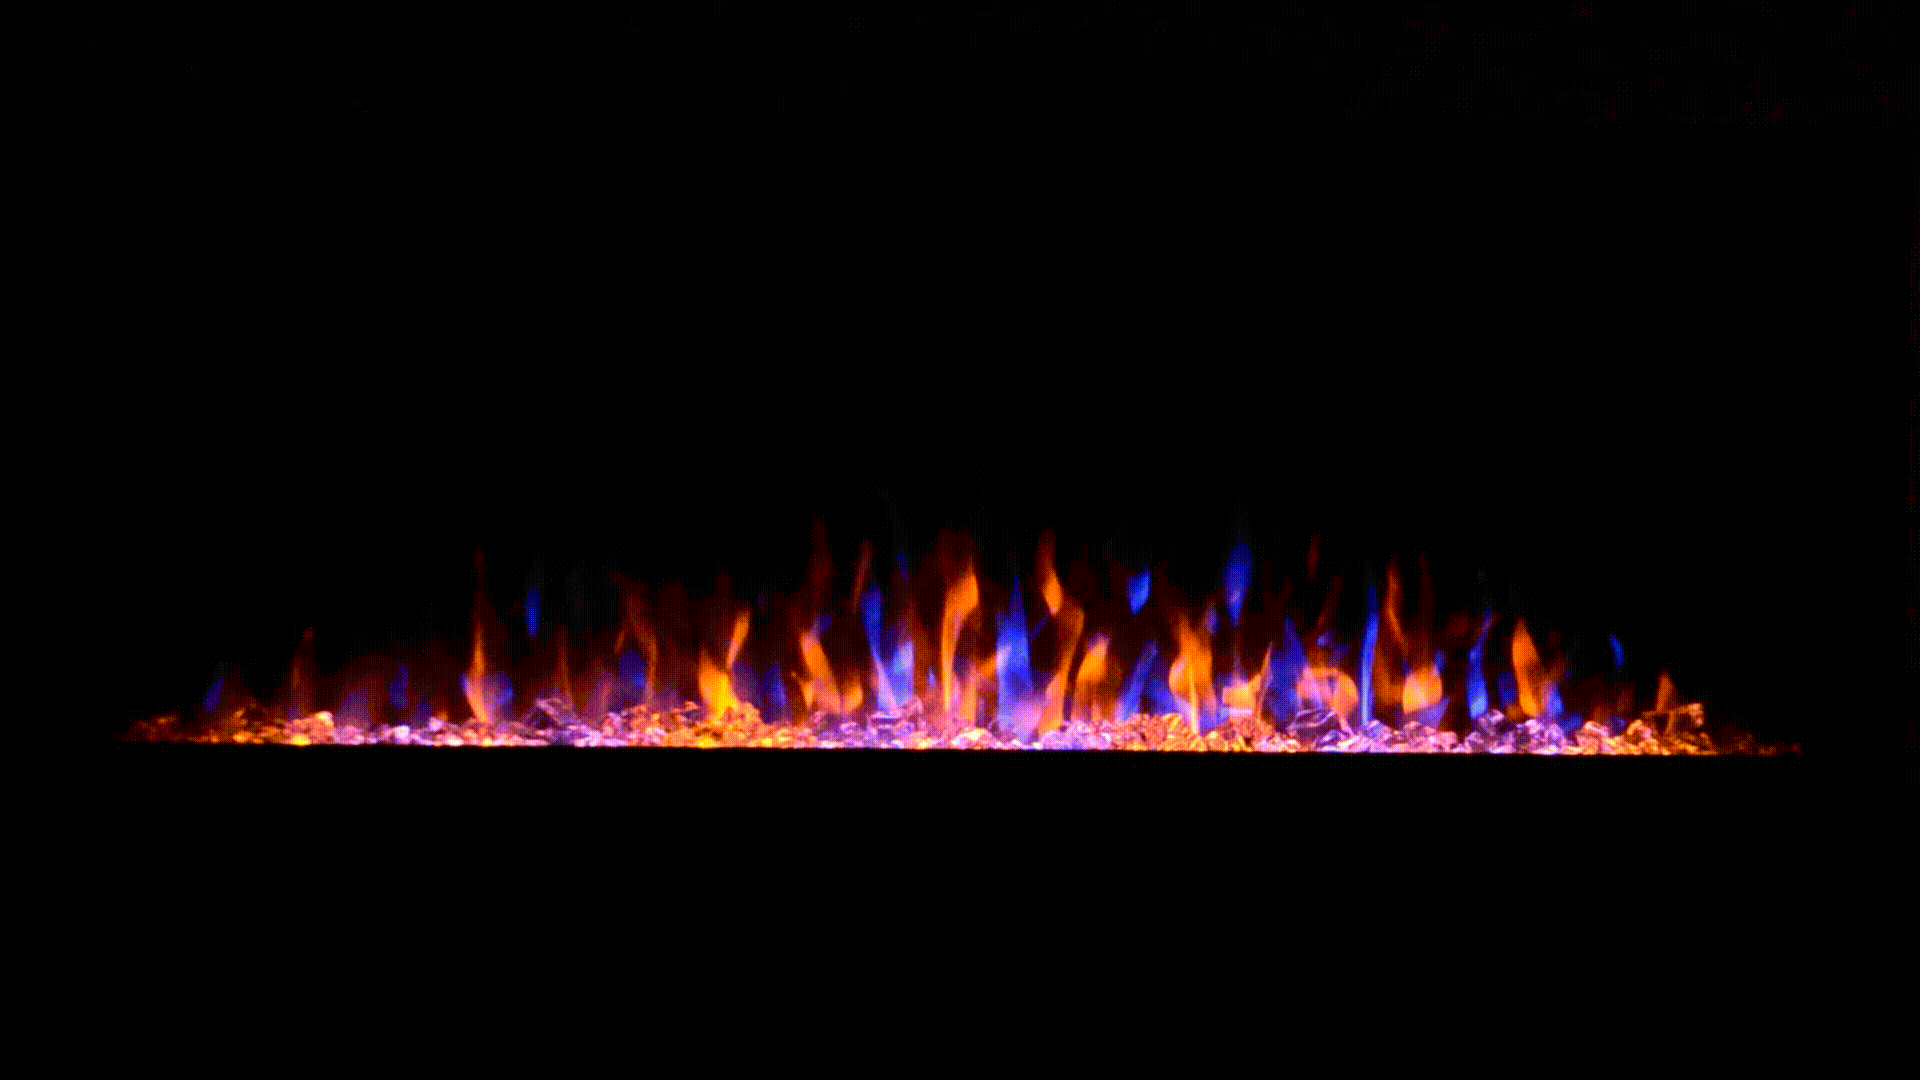 Sideline 100 80032 100 inch Recessed Electric Fireplace gif of flames moving with crystals.